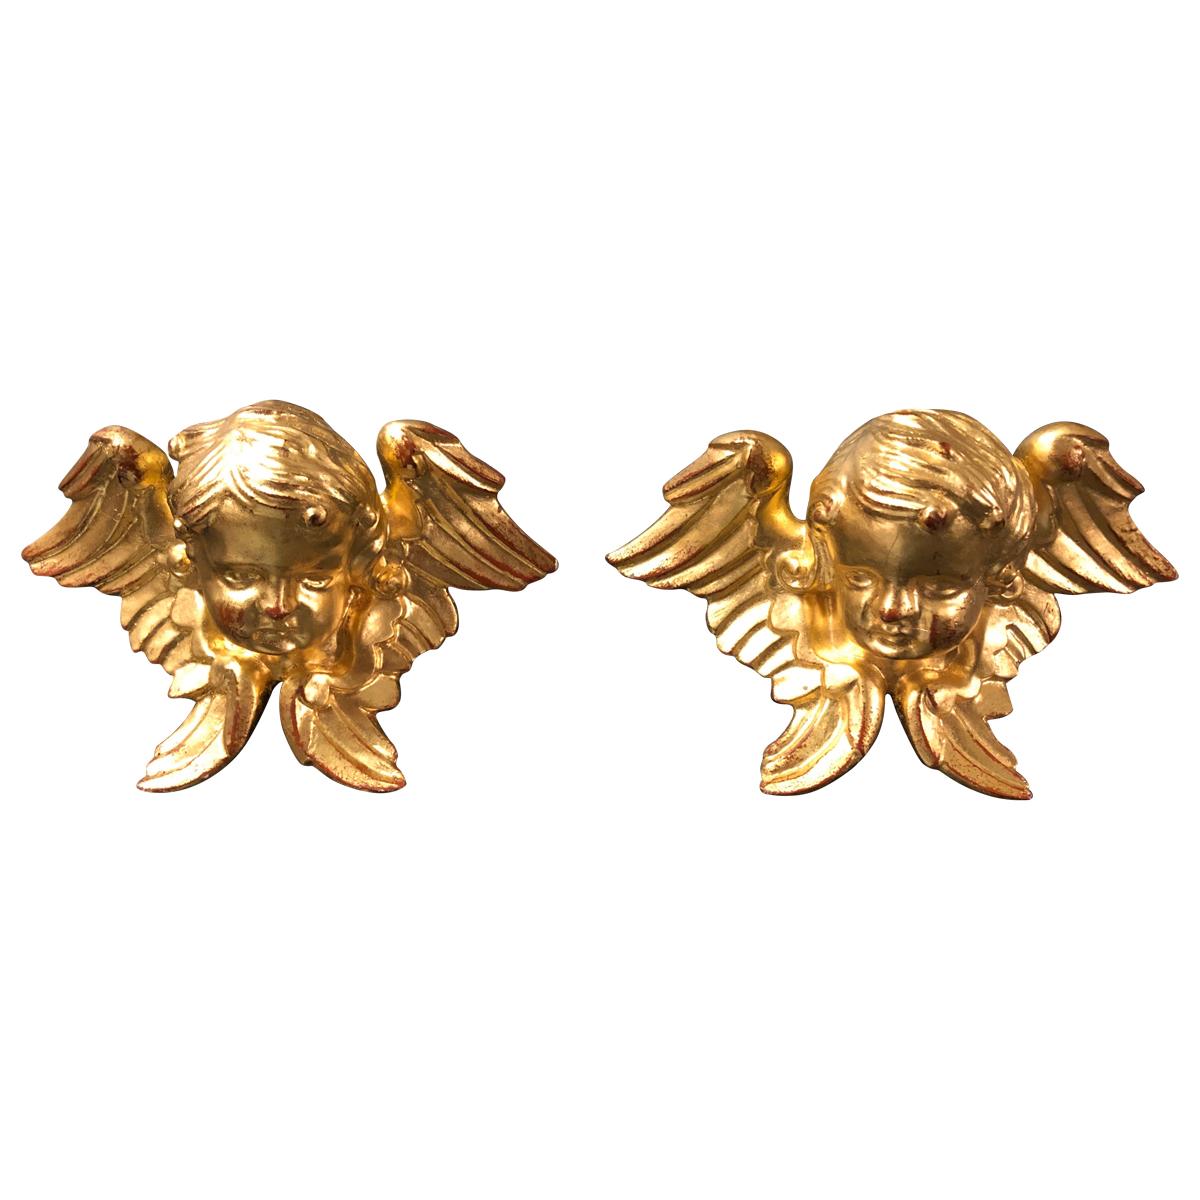 Antique Style Giltwood Pair of Small Sculpted Wood Winged Angels For Sale